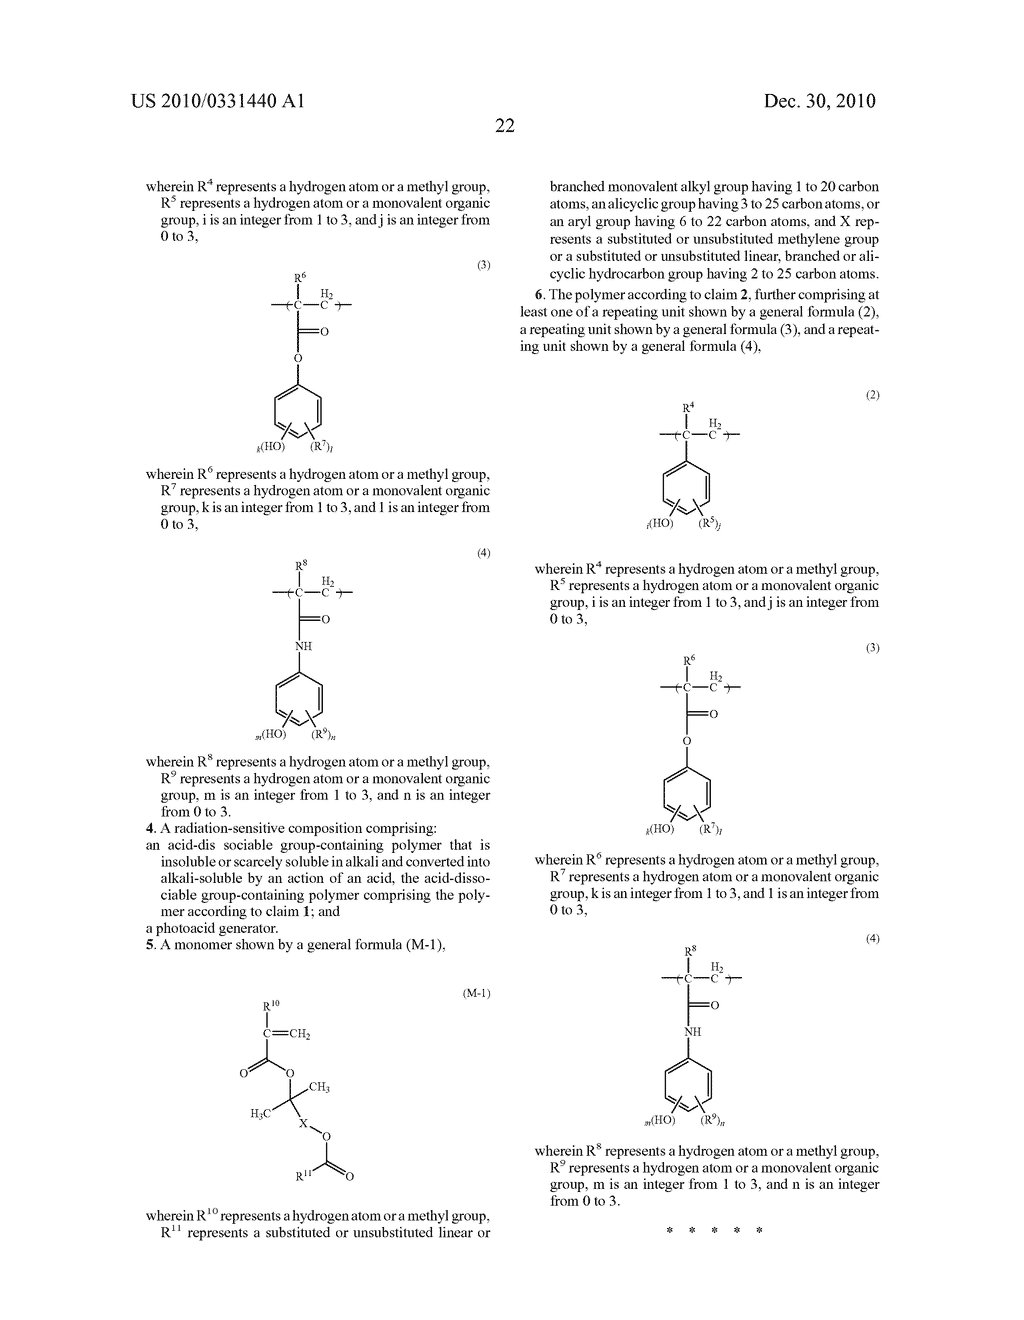 RADIATION-SENSITIVE COMPOSITION, POLYMER AND MONOMER - diagram, schematic, and image 25